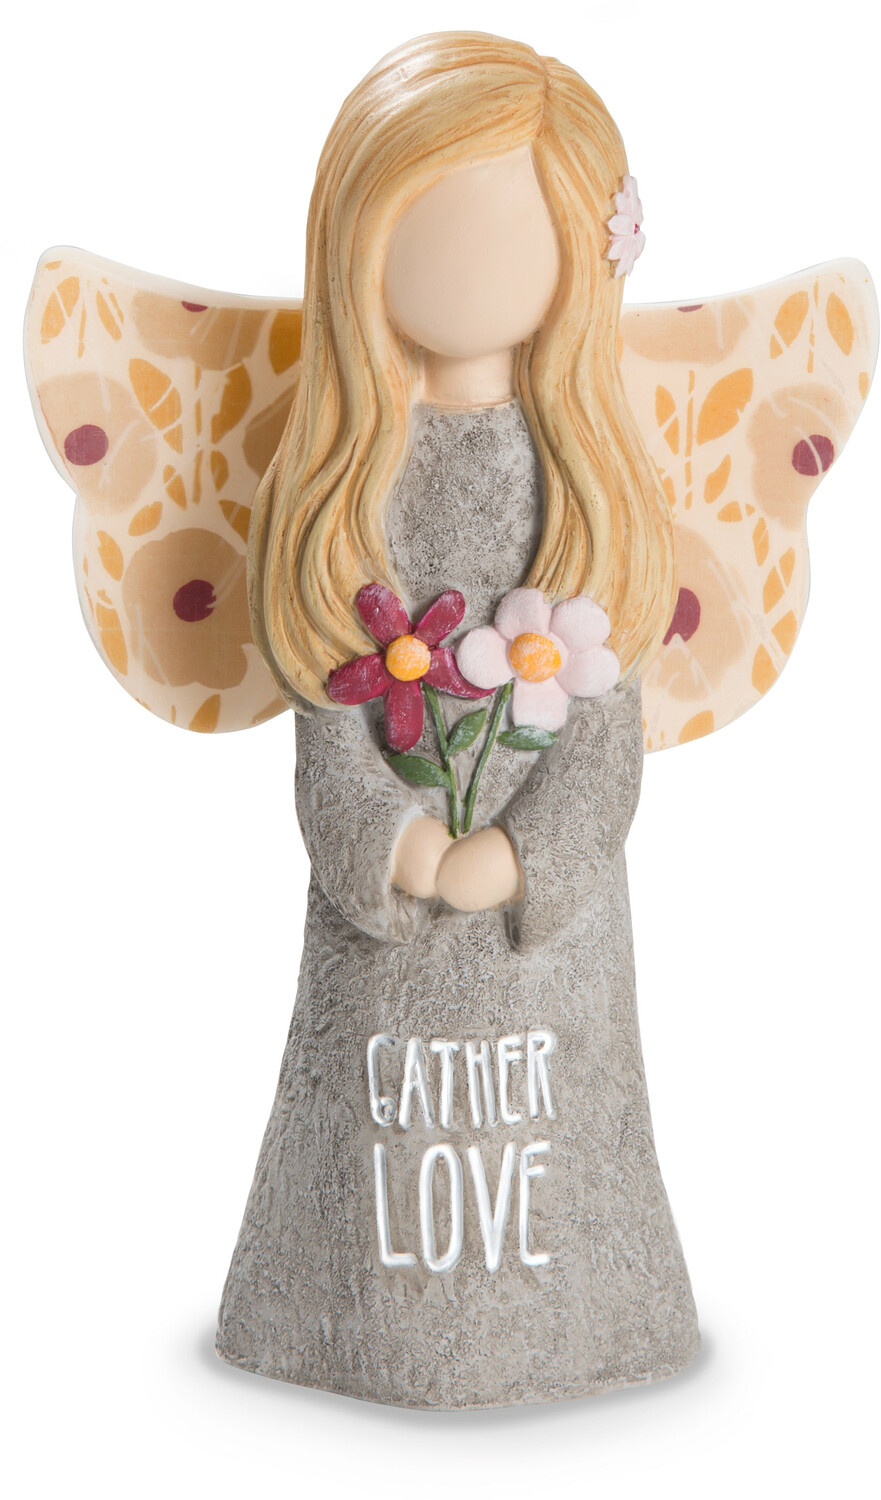 Gather Love by Bless My Bloomers - Gather Love - 5" Child Angel Figurine